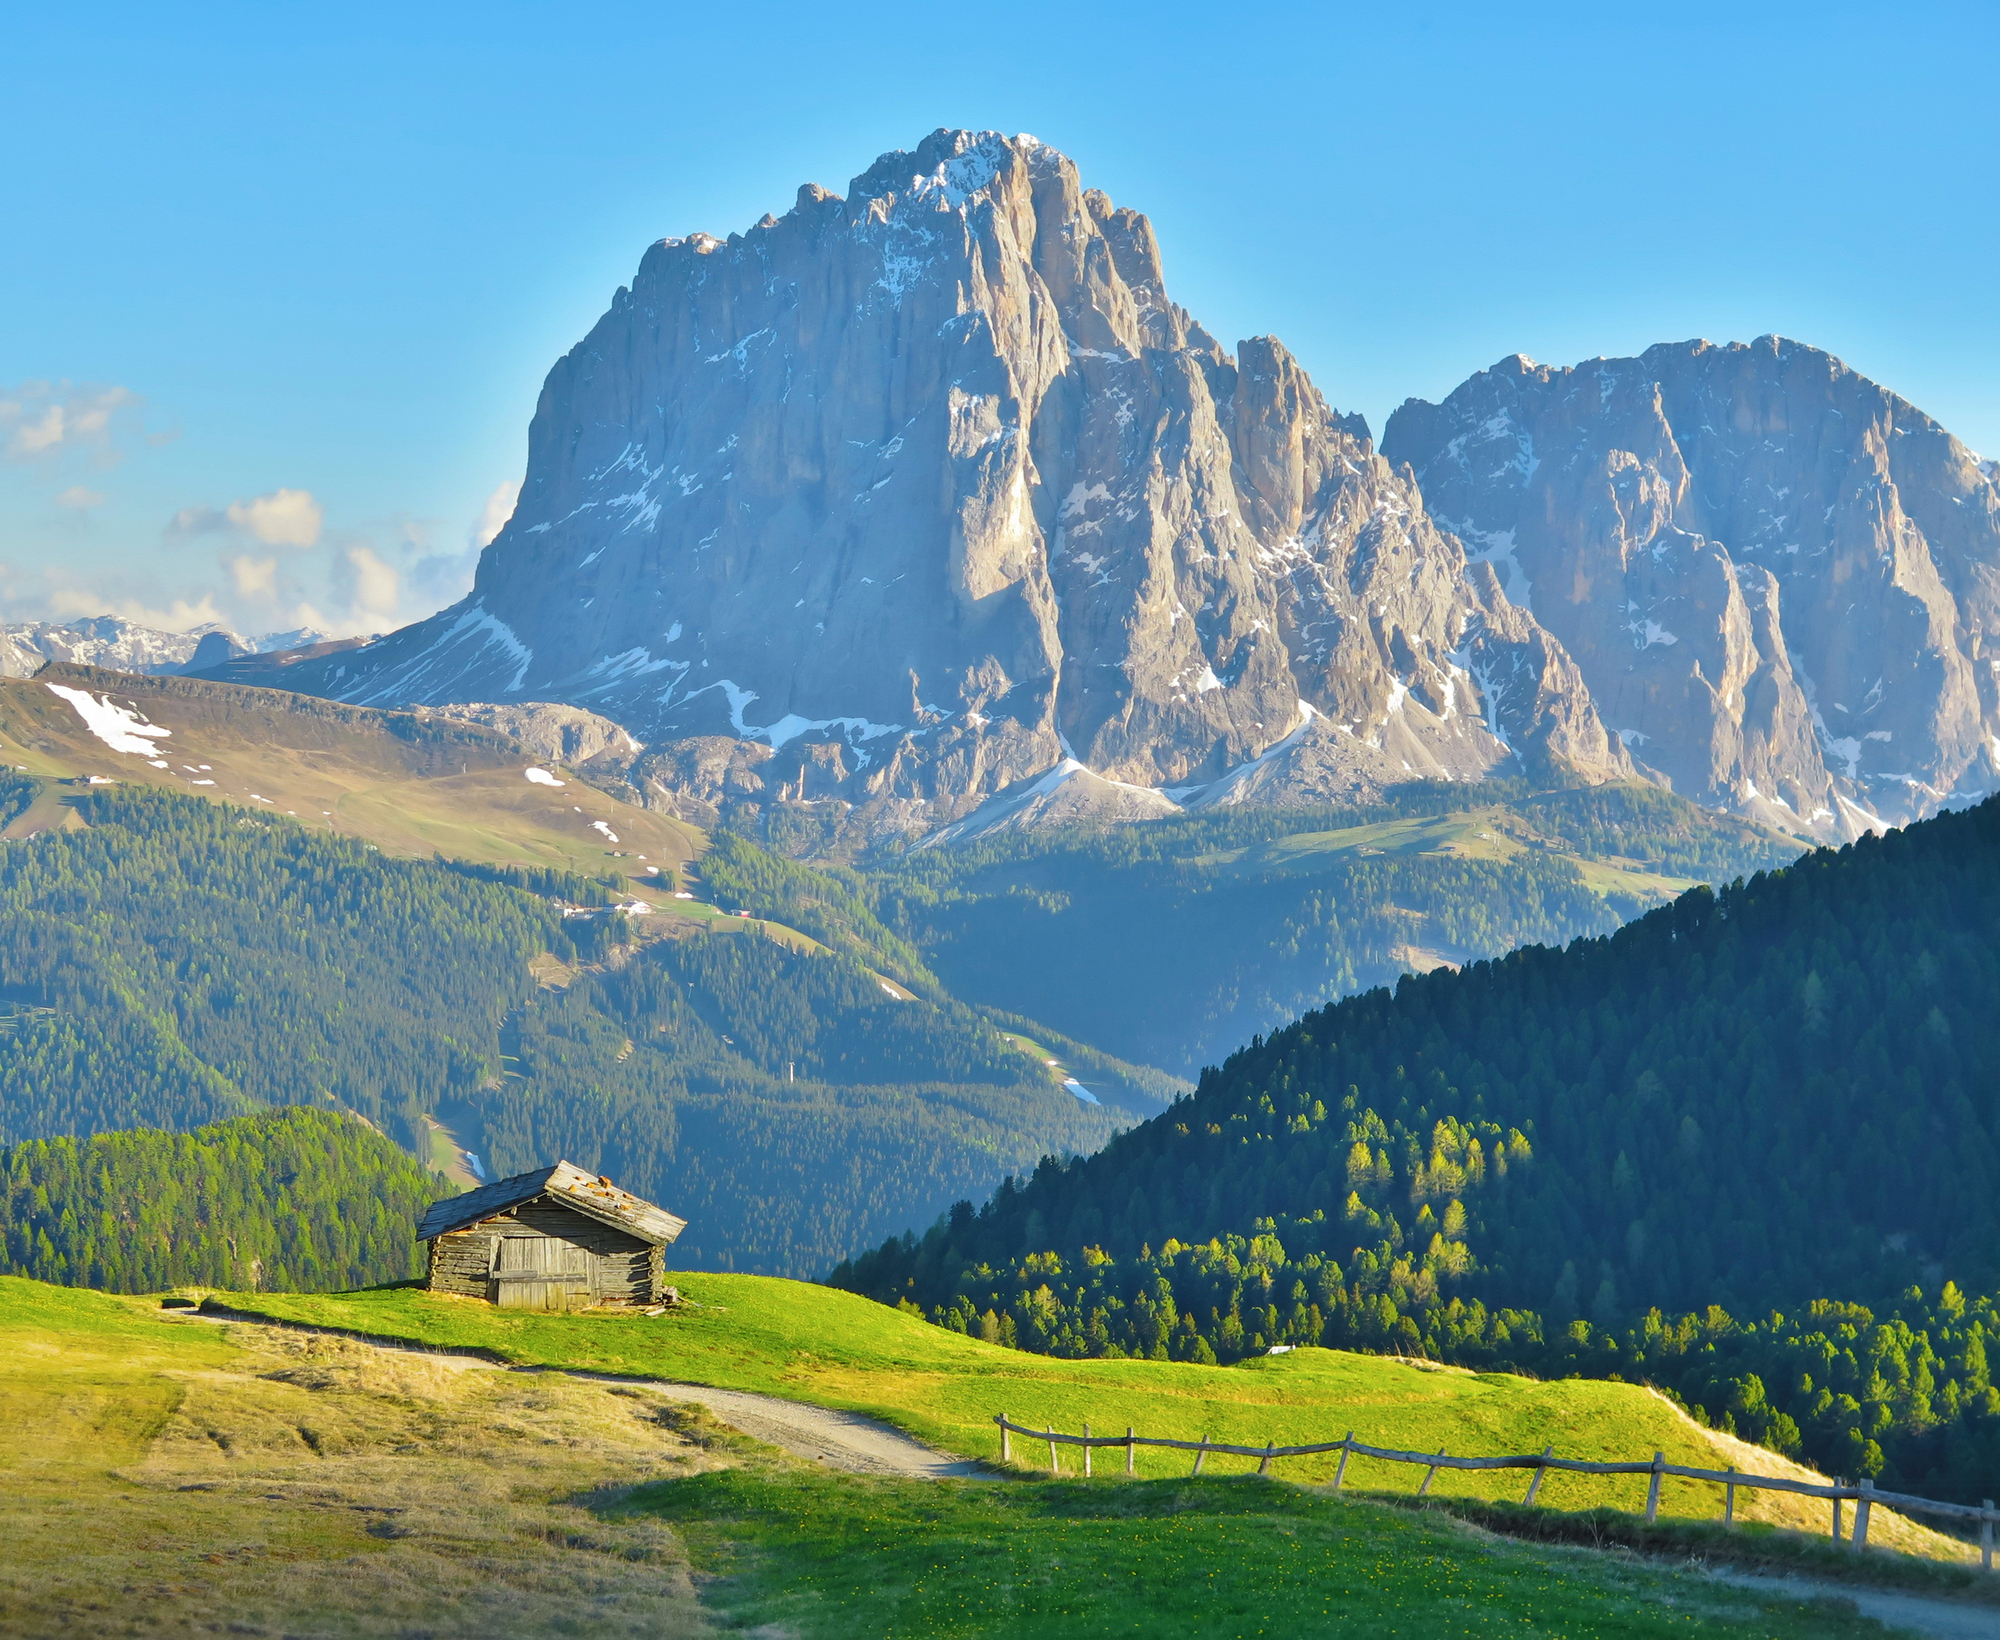 A simple hut and a grand mountain, an iconic view of Italy's ...